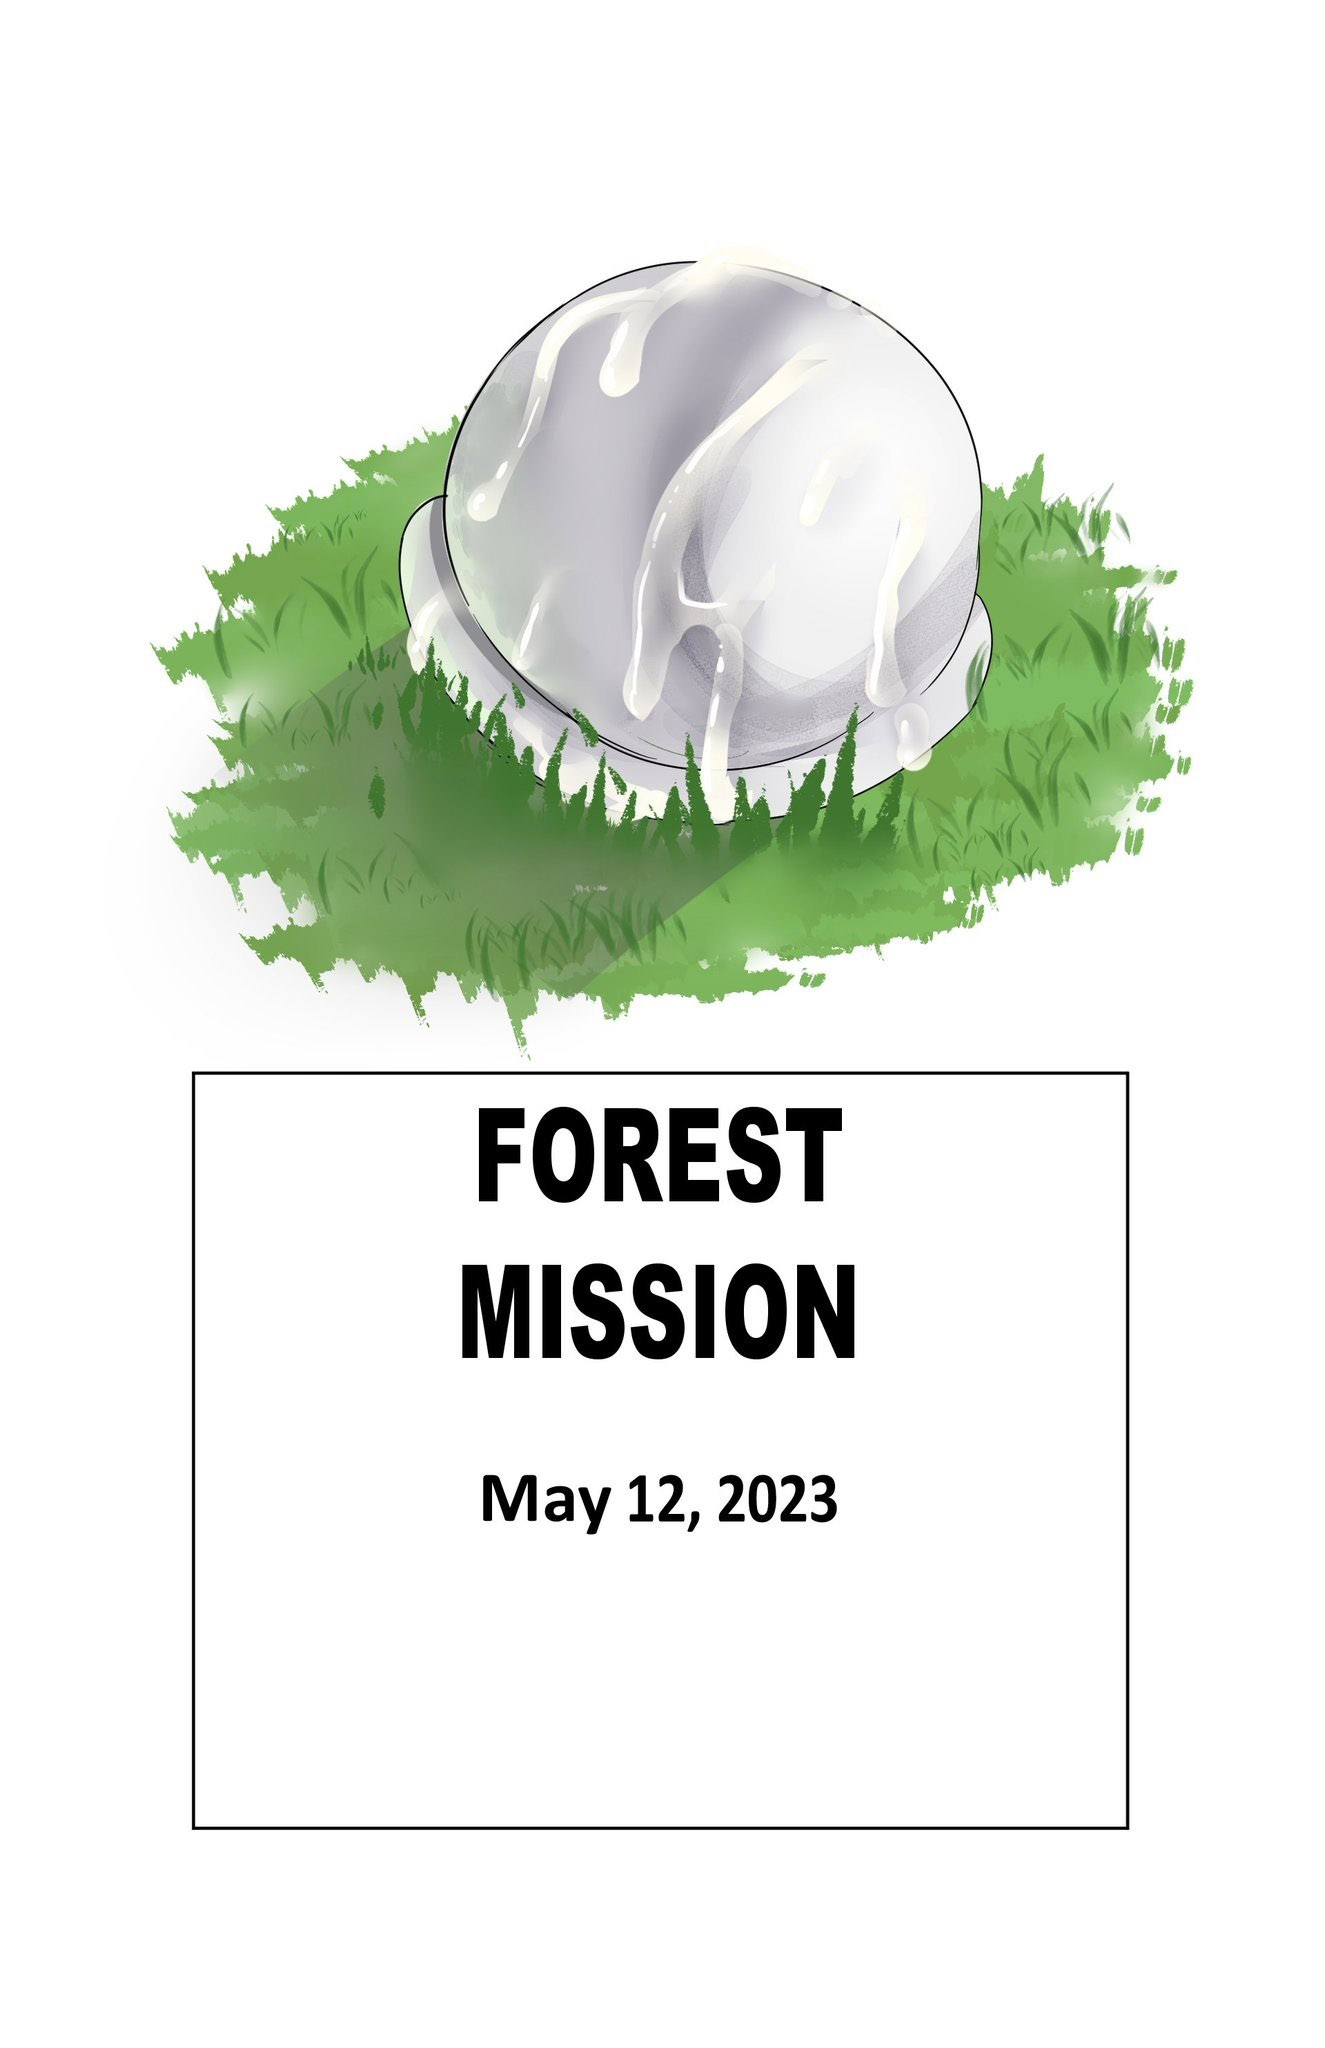 FOREST MISSION